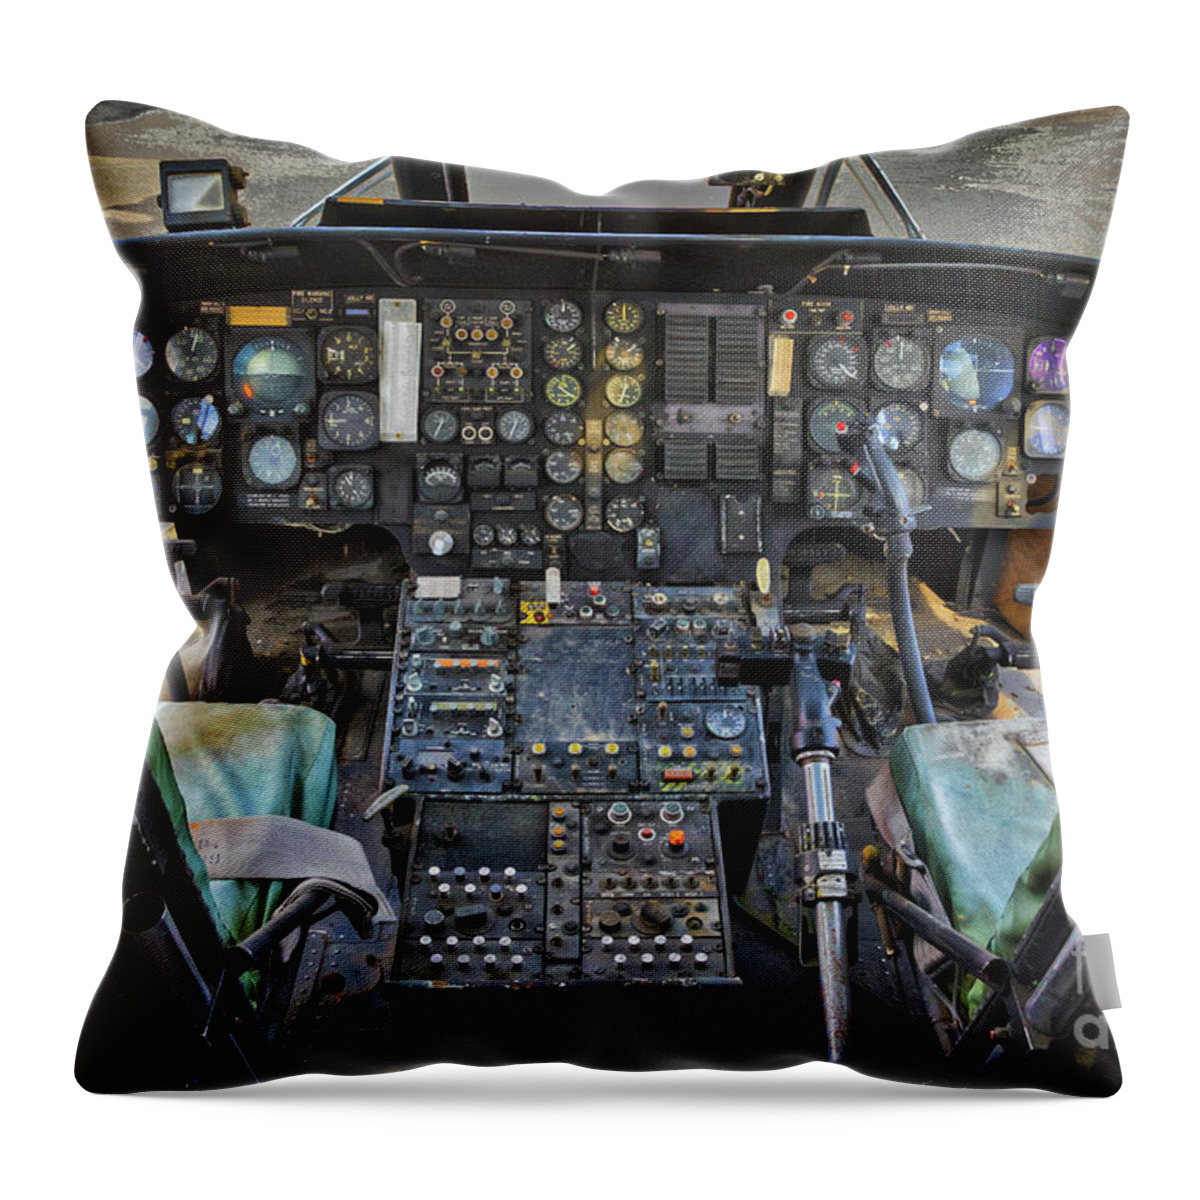 Sikorsky Cockpit Throw Pillow featuring the photograph Sikorsky Cockpit by Mitch Shindelbower